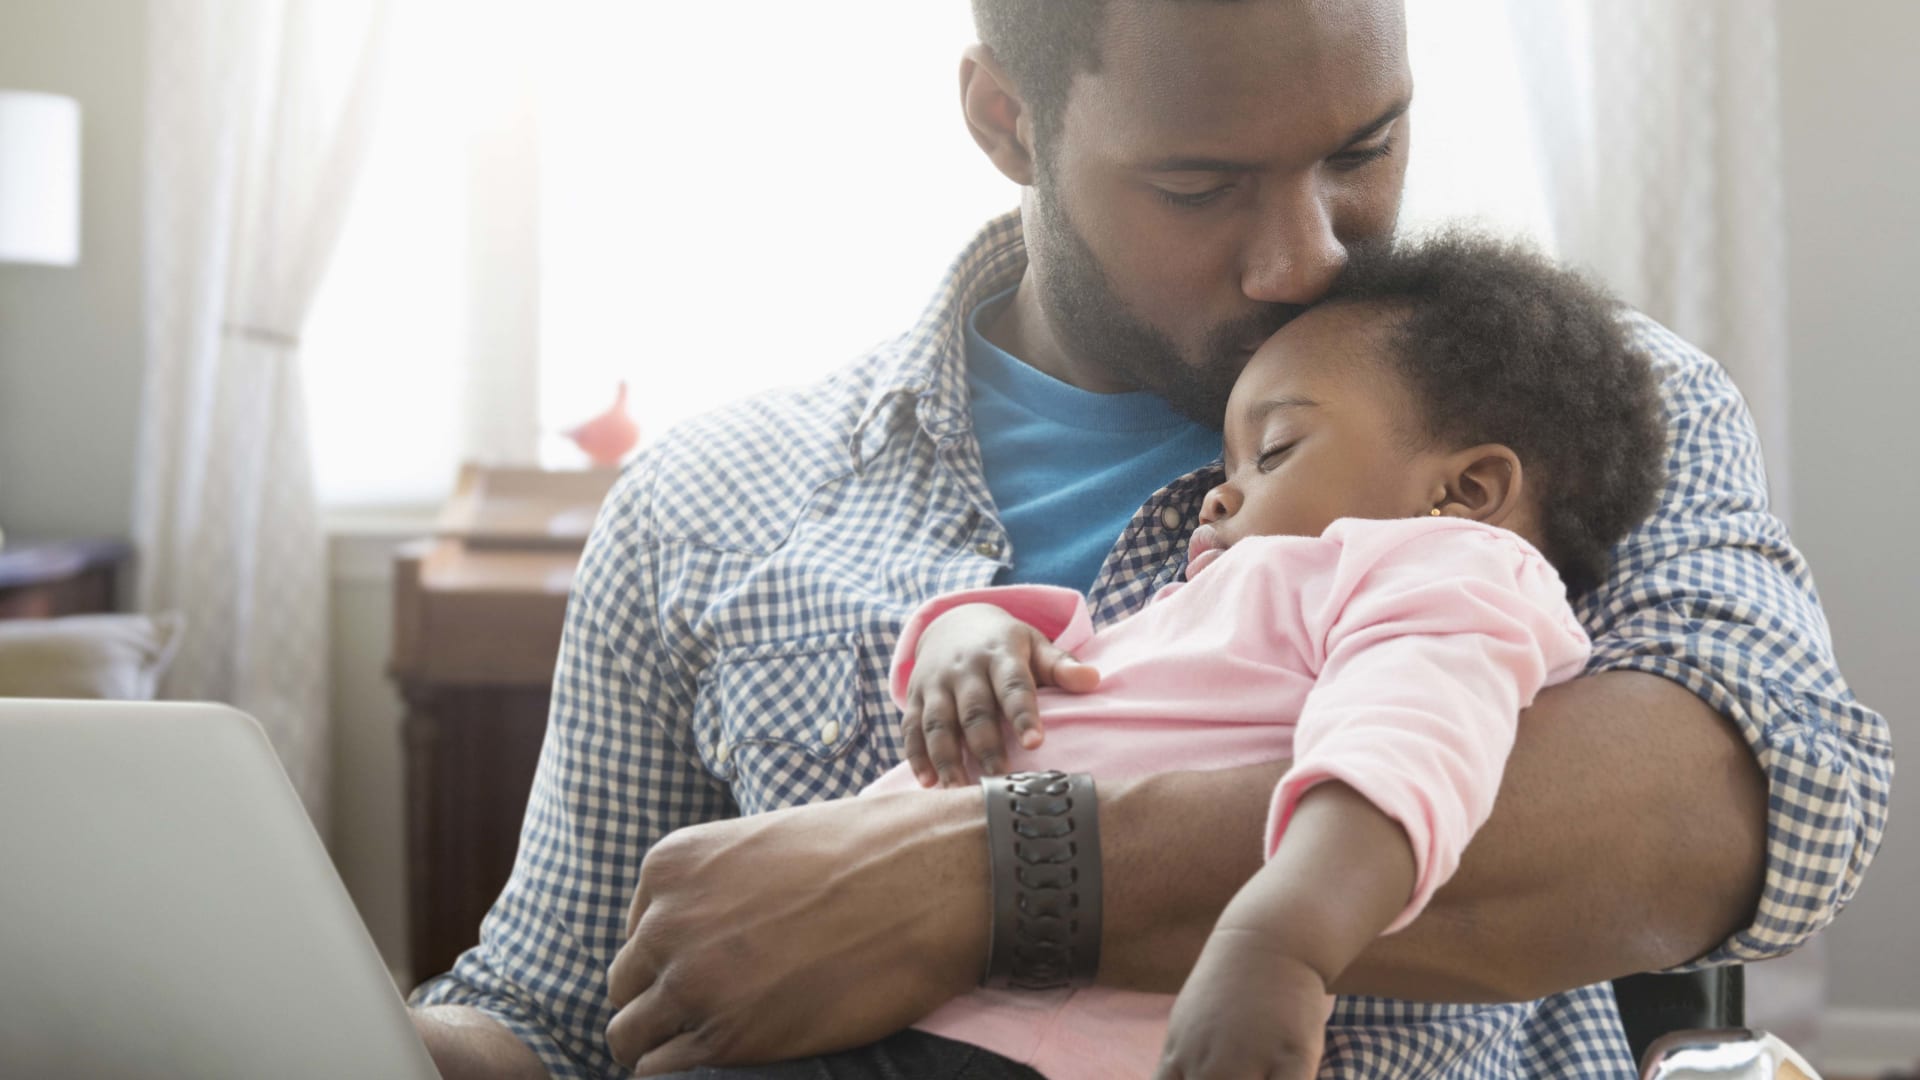 The Most Successful Working Parents Get There by Doing 4 Things